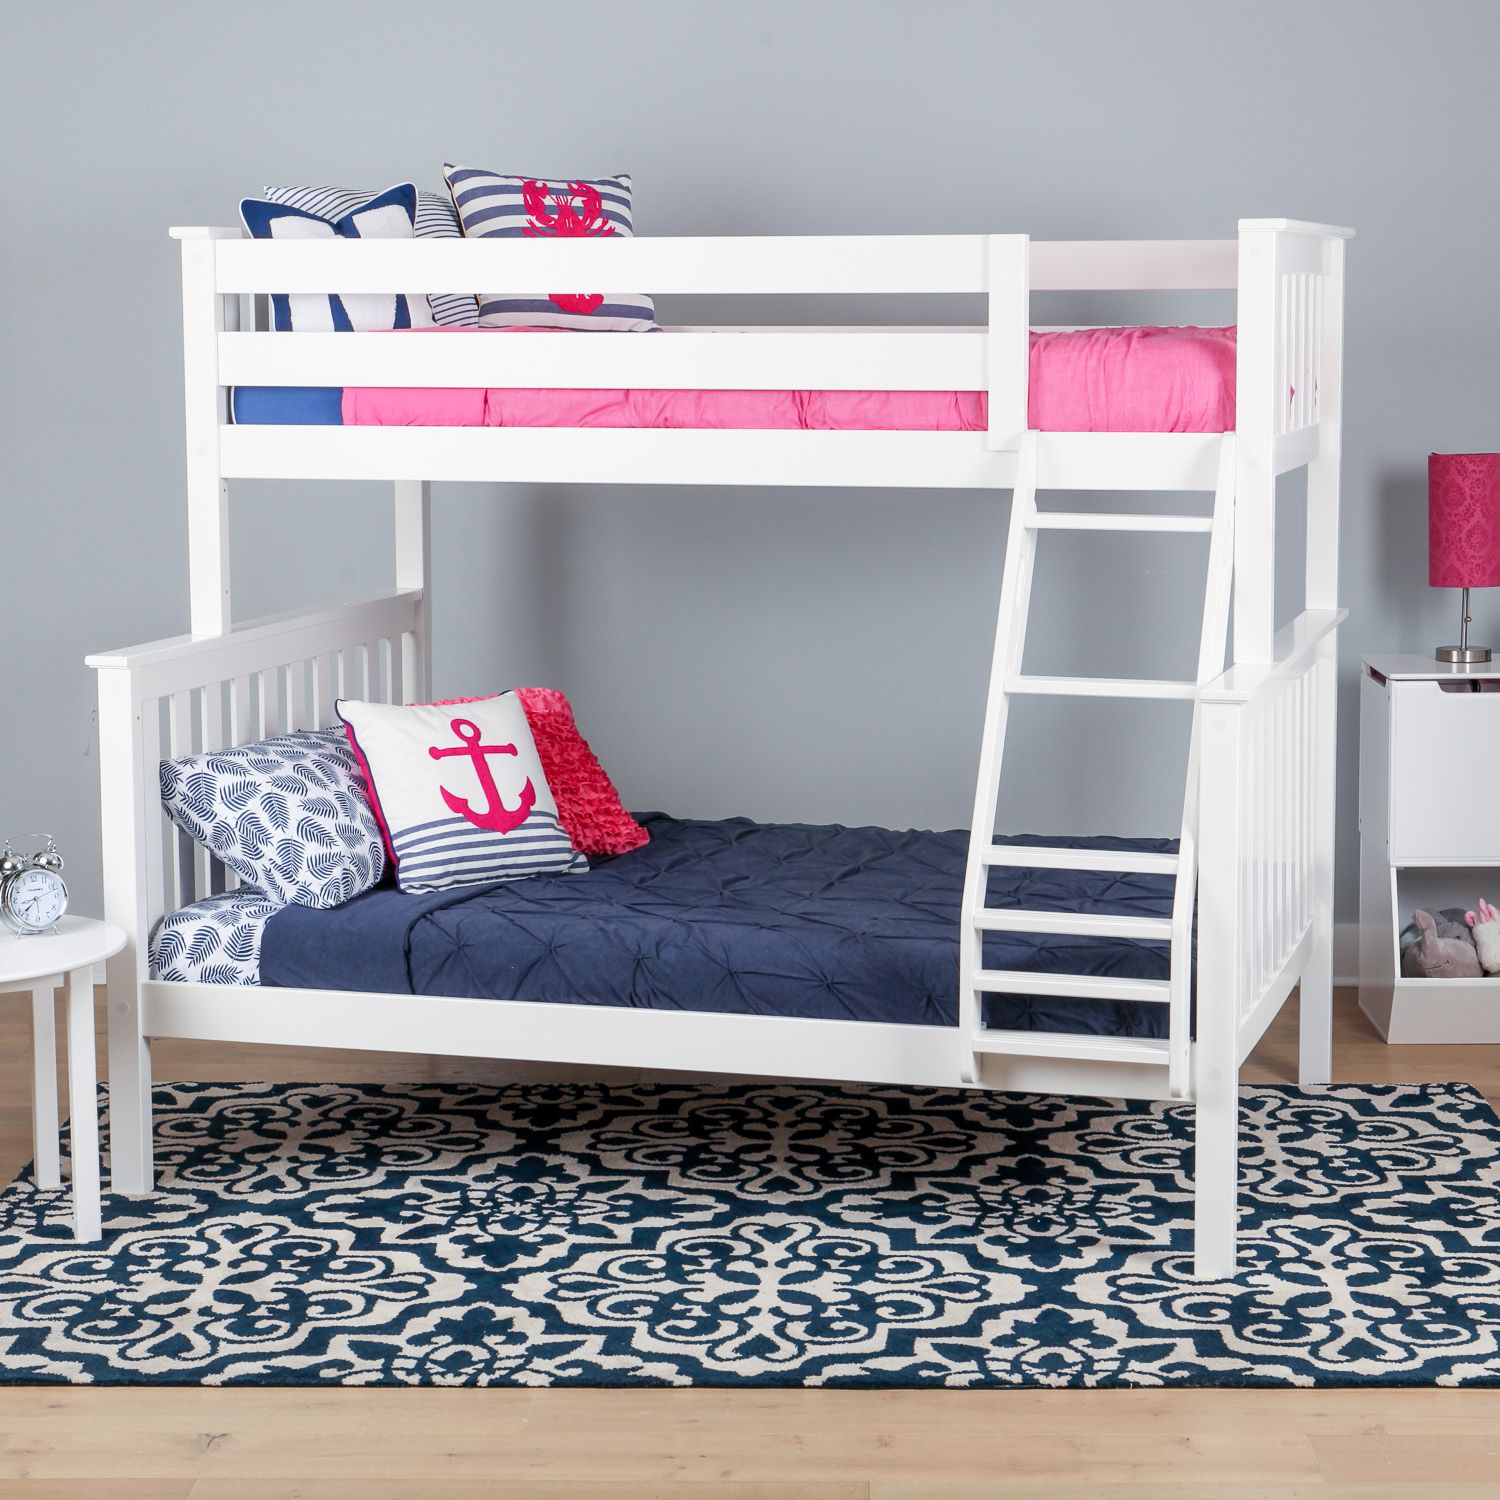 M3 Furniture White Twin/Full Bunk Bed